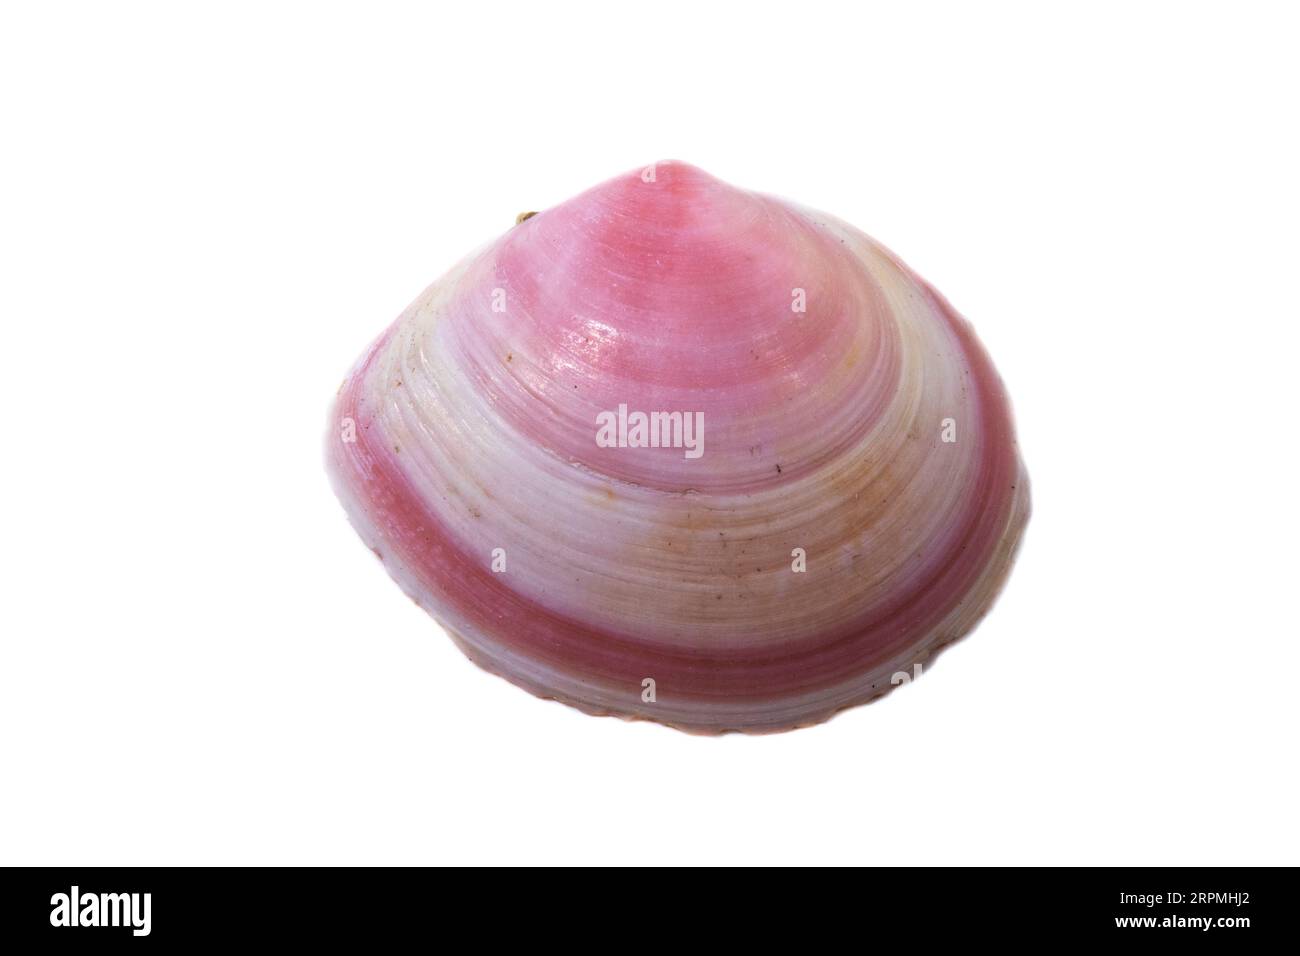 Baltic macoma, Baltic clam, Baltic tellin (Limecola balthica), side view, cut out, Netherlands Stock Photo